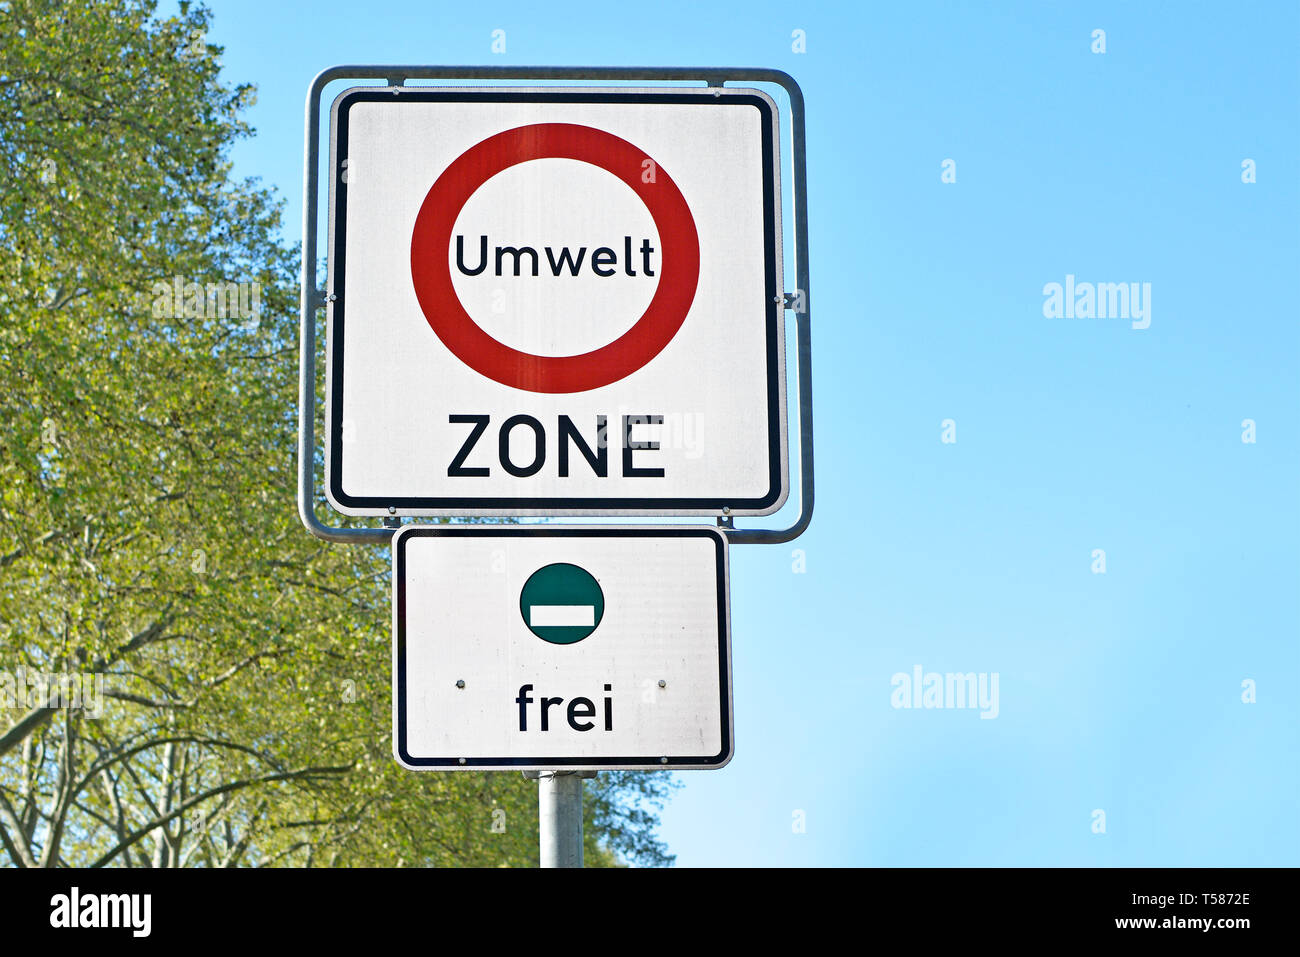 Road traffic sign marking a low emission zone in city centers in Germany translating as "Environmental Zone" and sign green environmental badget Stock Photo